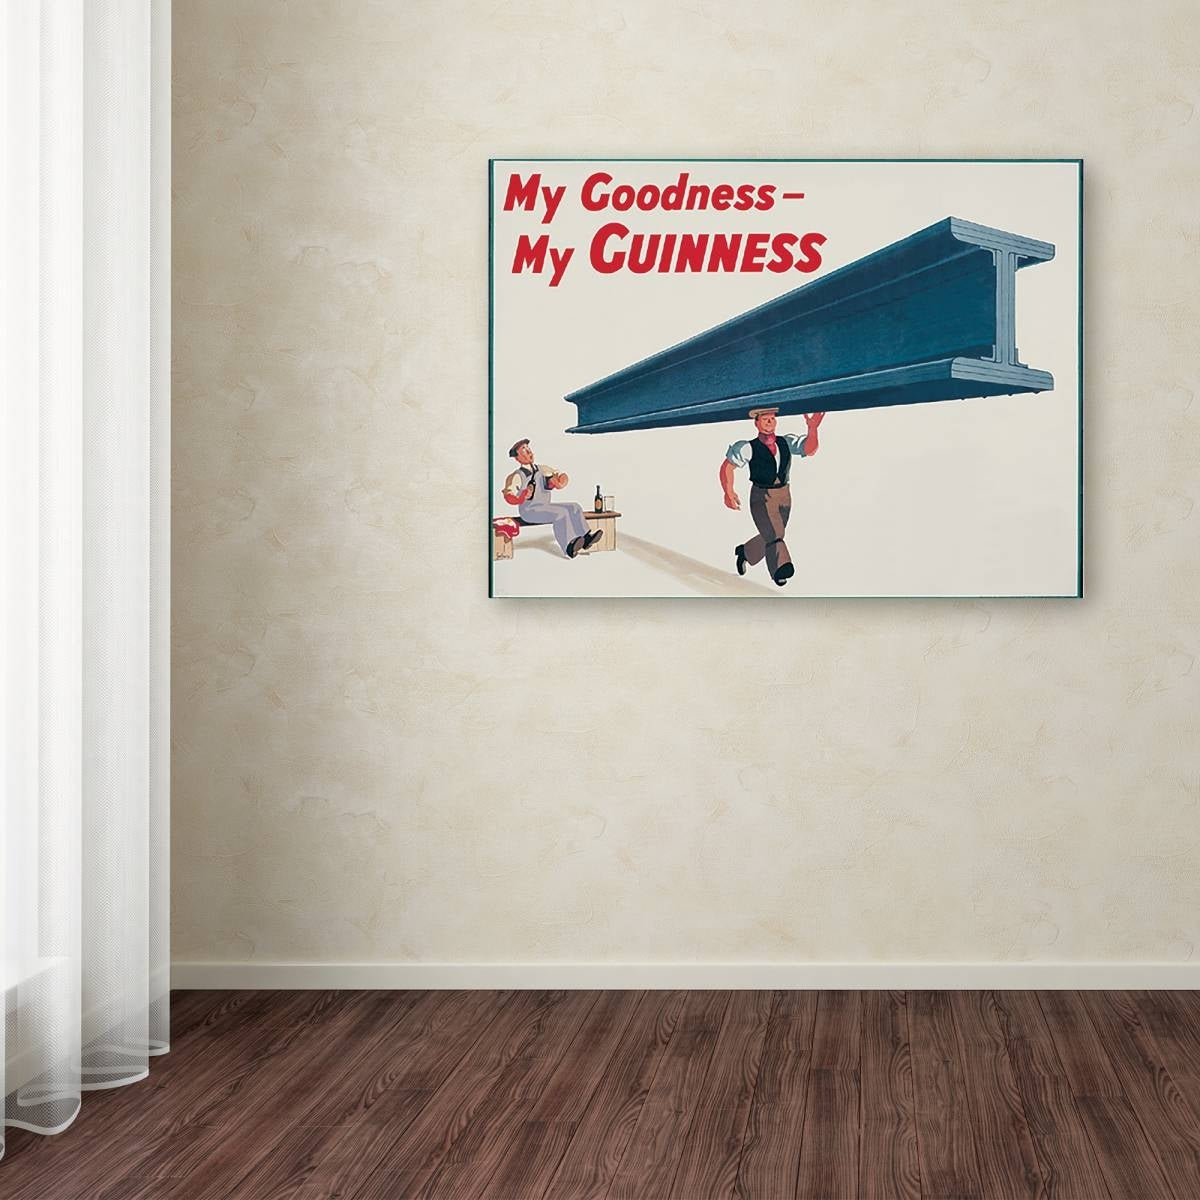 Transform your home bar with a stunning Guinness Brewery 'My Goodness My Guinness XVII' canvas art print.